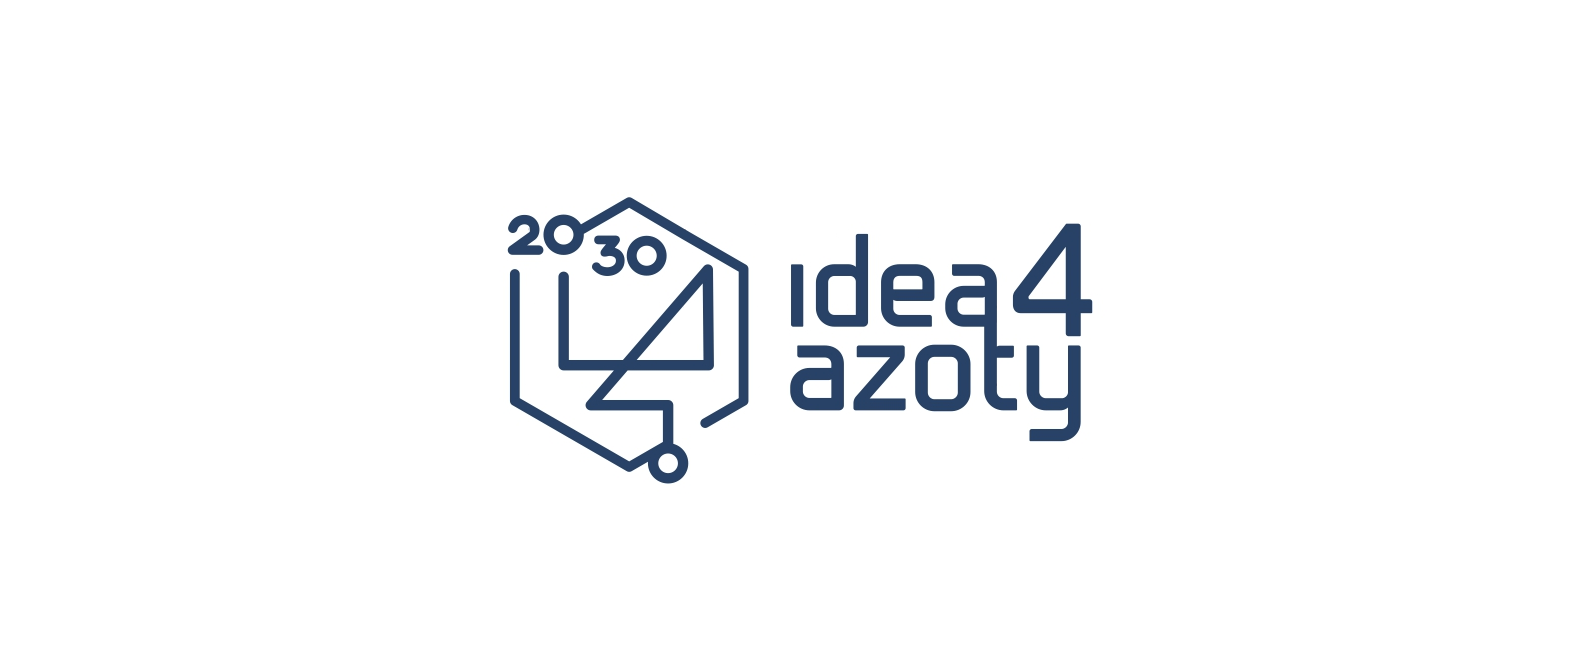 Grupa Azoty launches new edition of its acceleration programme Idea4Azoty 2030